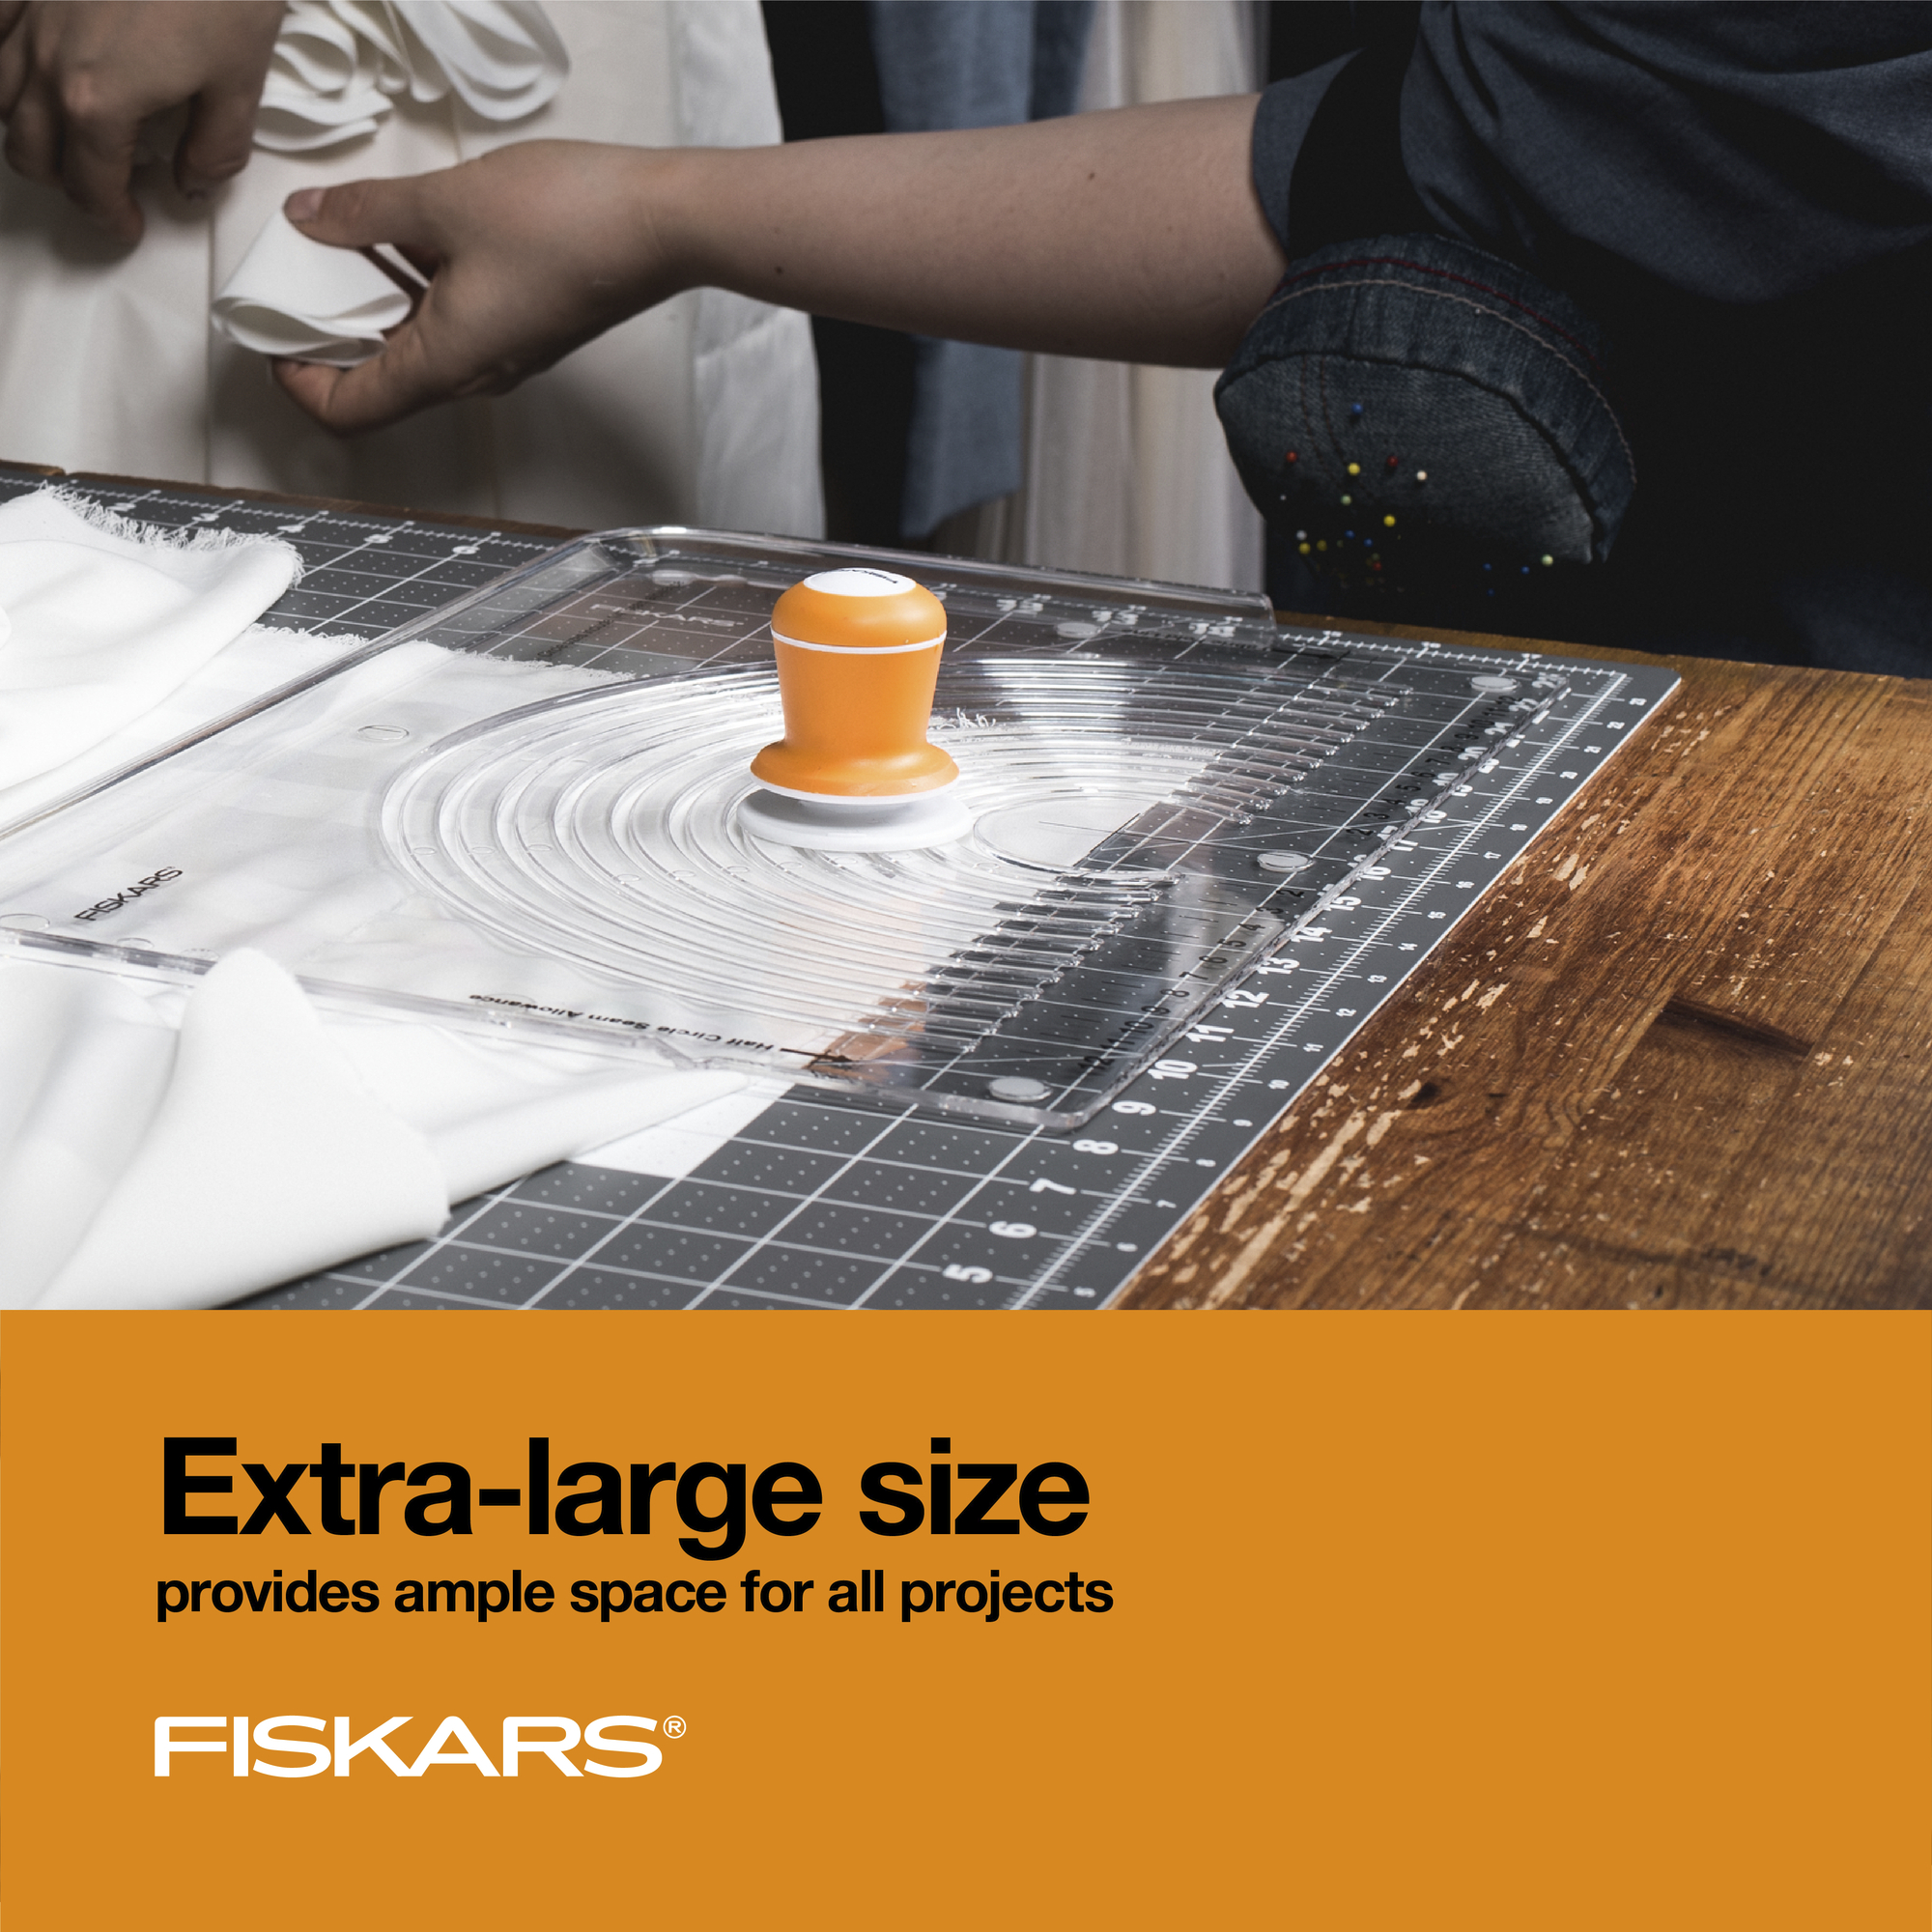 Fiskars 24" x 36" Self-Healing Double-Sided Cutting Mat, Gray and White - image 2 of 6